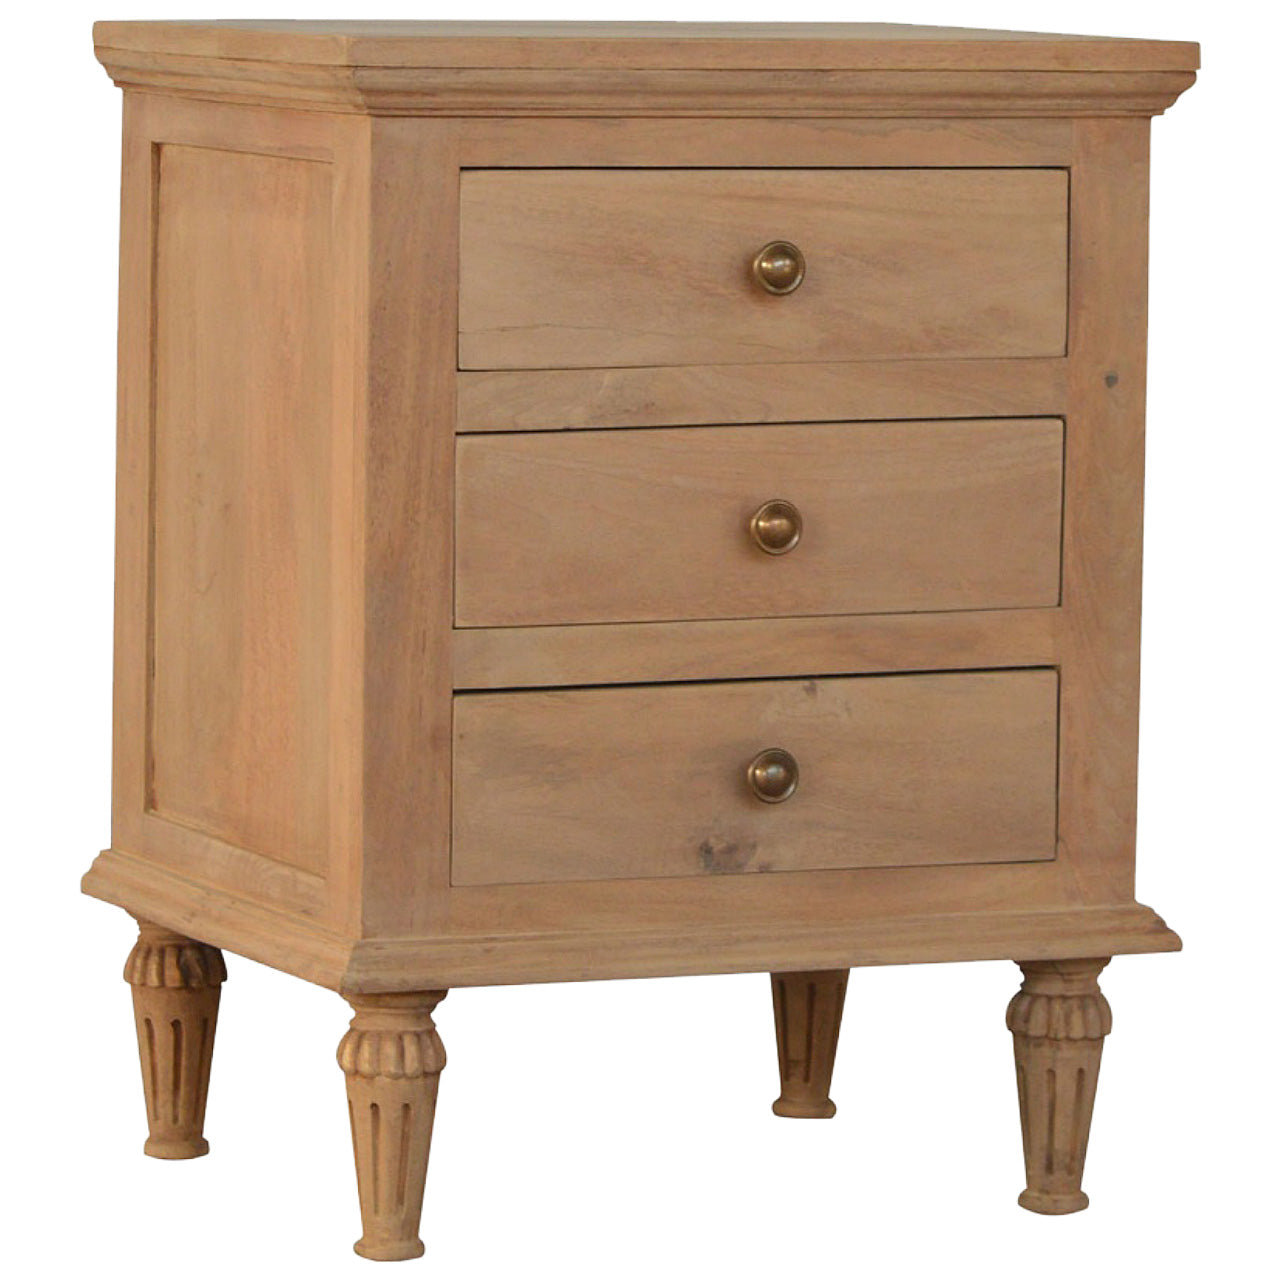 View 3 Drawer Mango Wood Bedside Table information